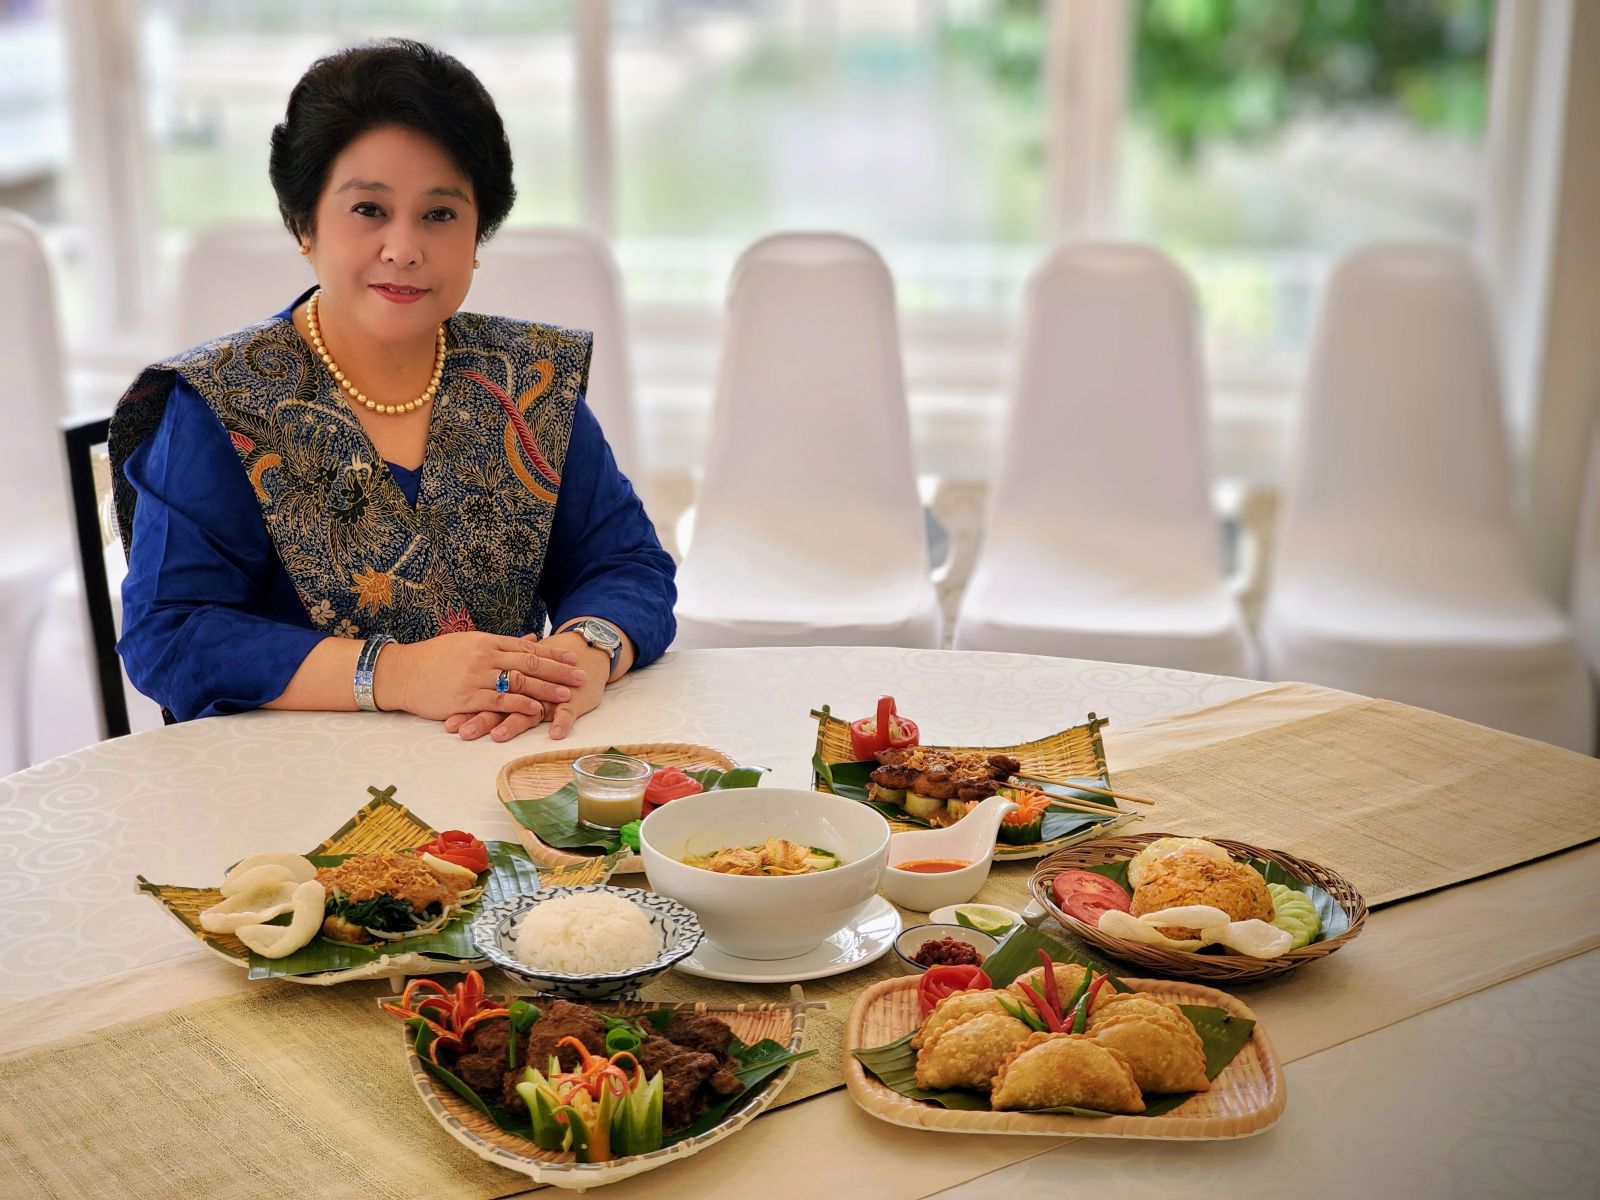 Indonesia: A Diverse Culinary Story